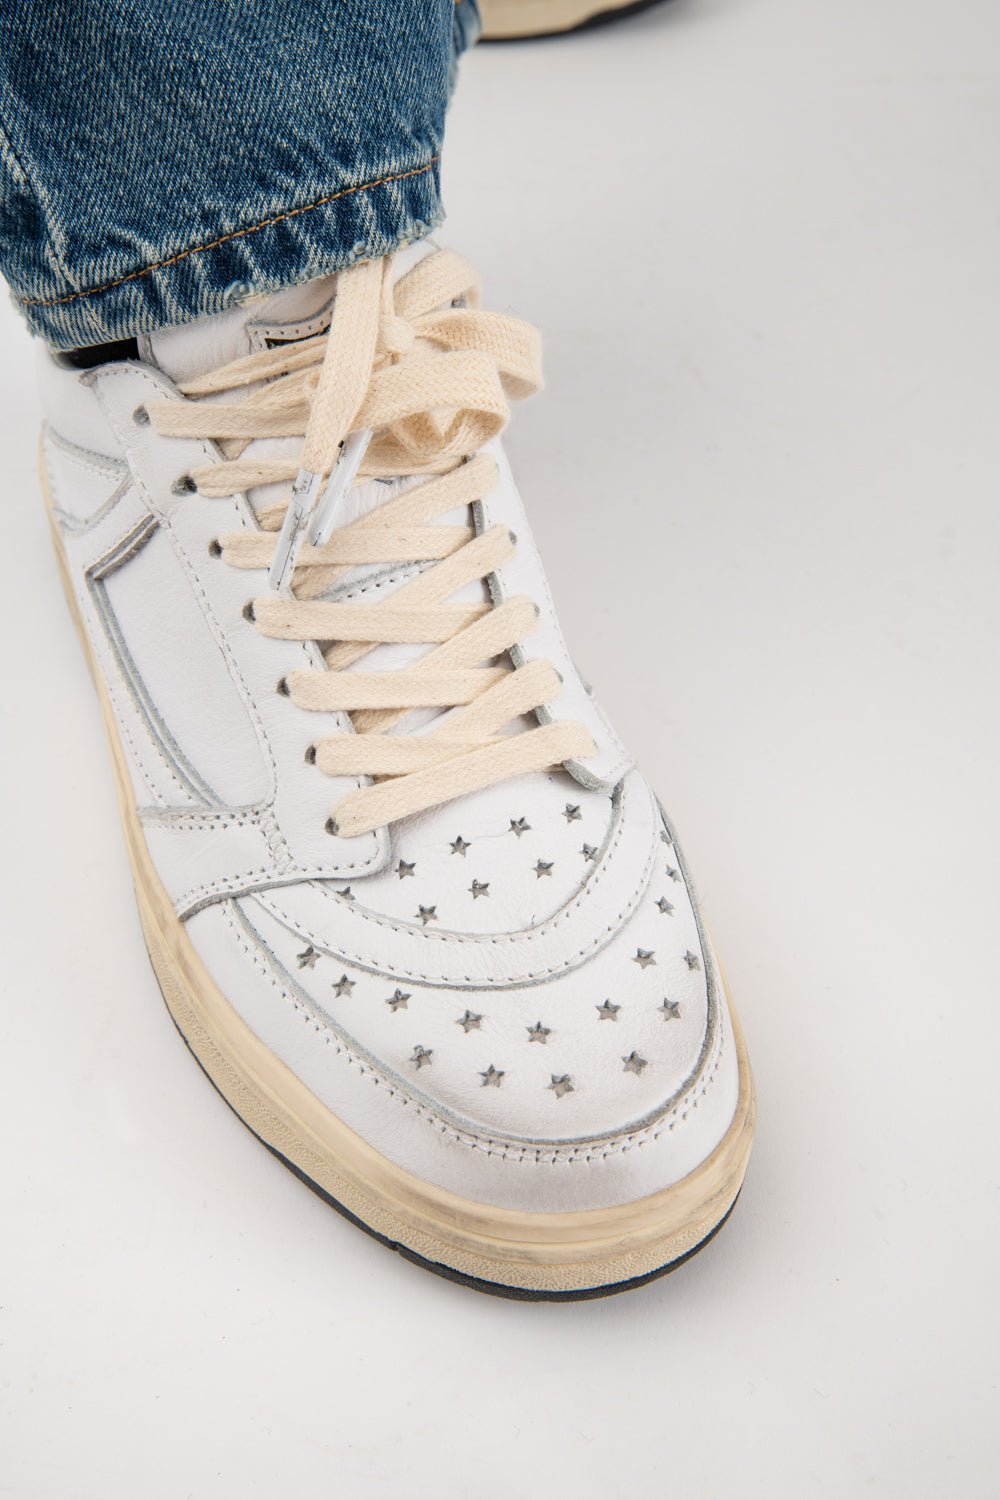 STARLIGHT LOW SHIELD WOMAN Starlight Low Shield Woman Sneakers, back pull loop with logo detail, rubber sole, perforated toe and front lace-up closure, 100% leather HTC LOS ANGELES